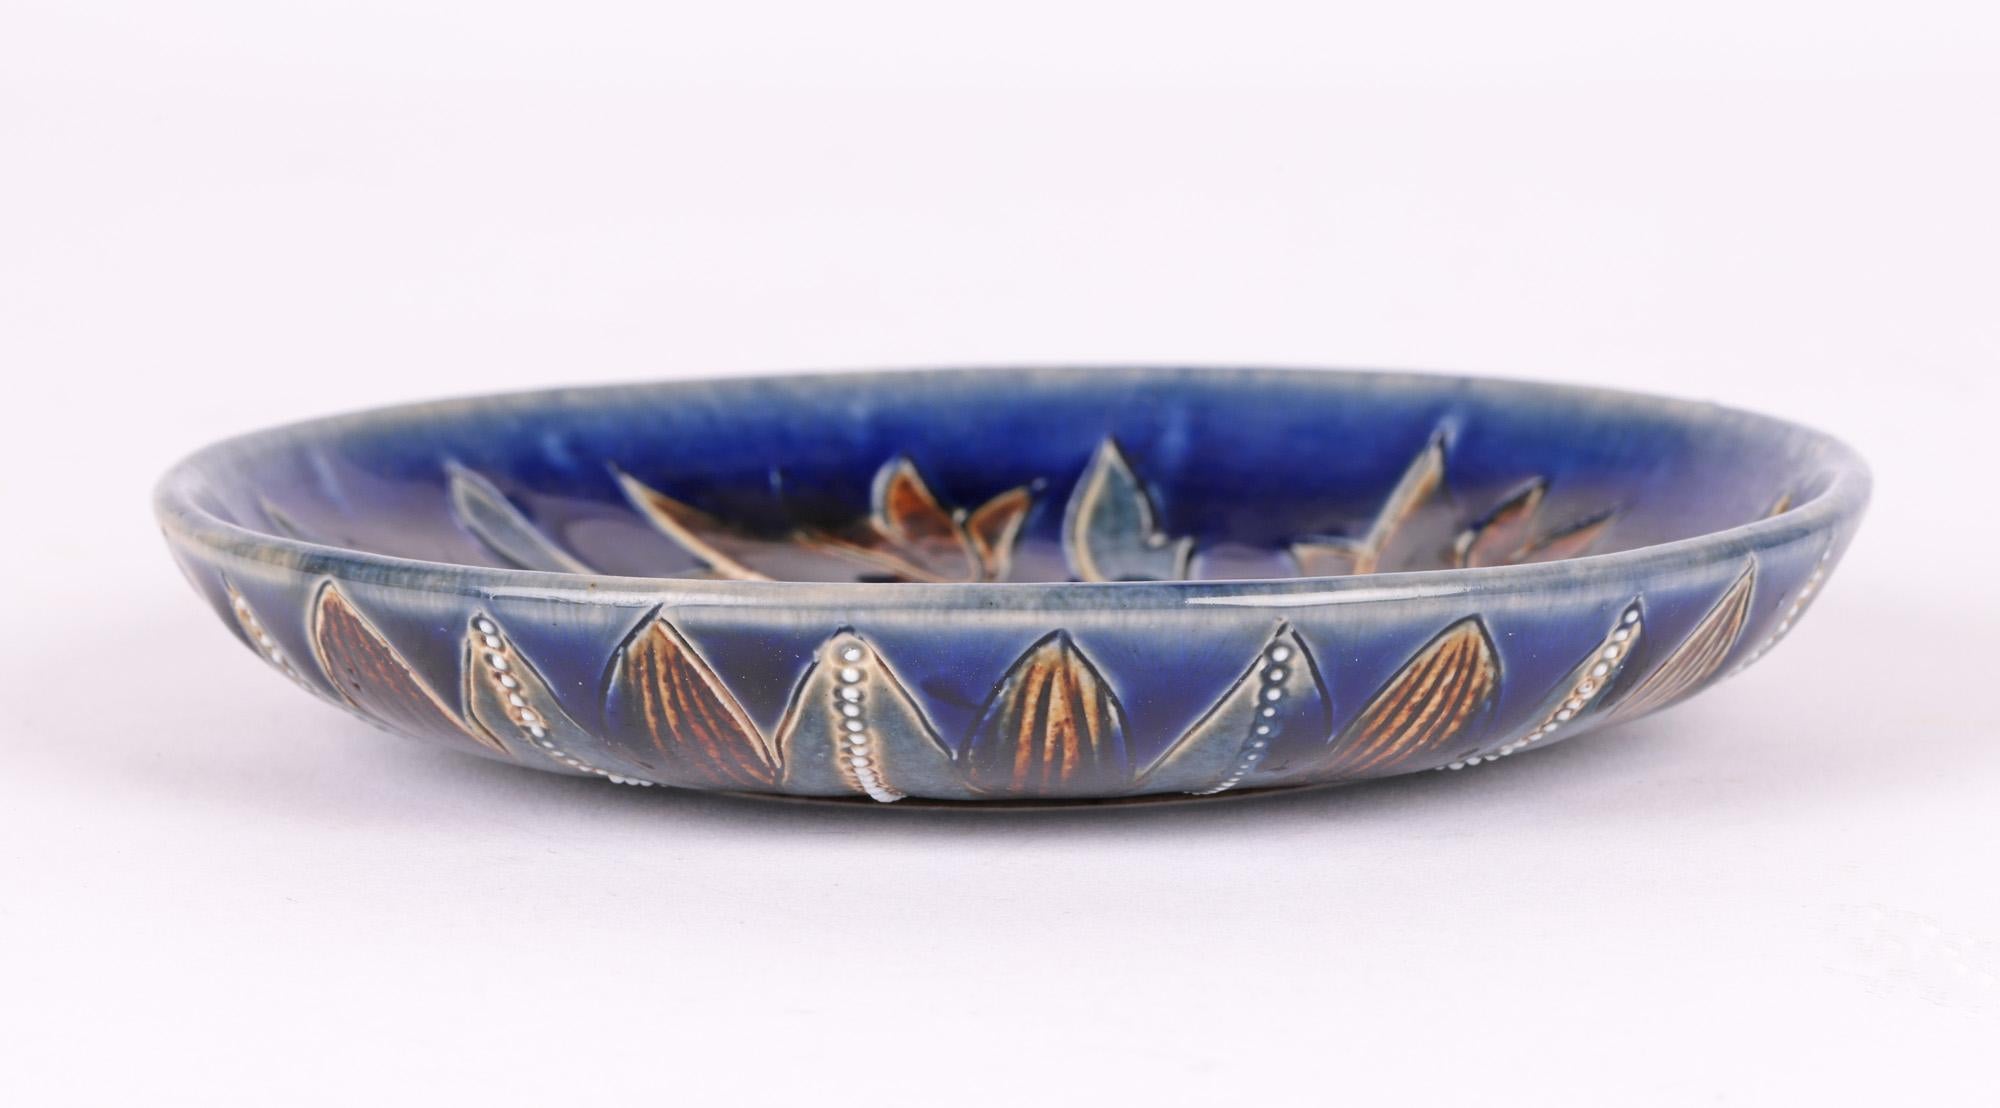 A scarce and finely made Doulton Lambeth art pottery pin dish decorated with trailing floral designs by renowned artist Florence E Barlow and dated 1879. The small round stoneware dish stands on a narrow round unglazed foot with slightly recessed